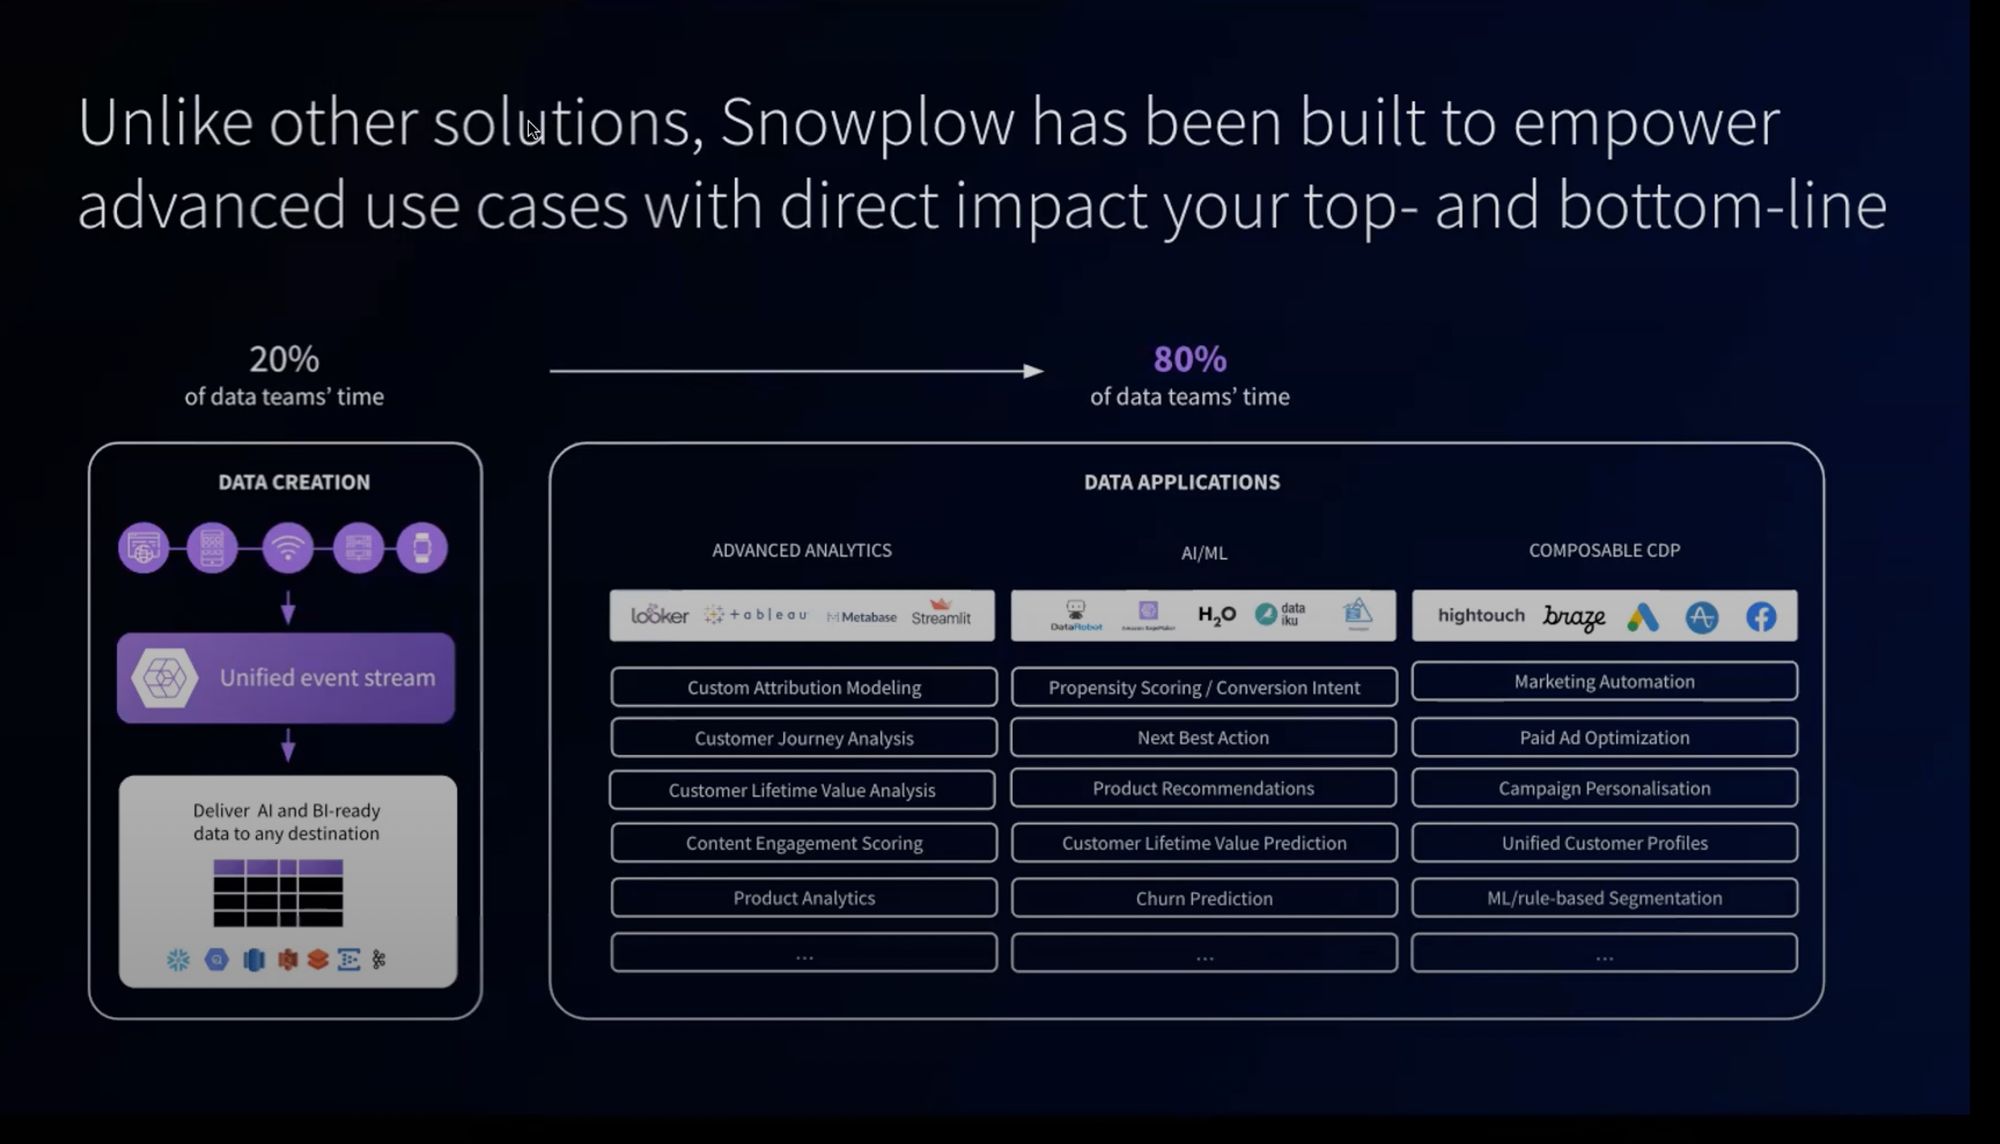 Screenshot from the introduction to the Snowplow demo.